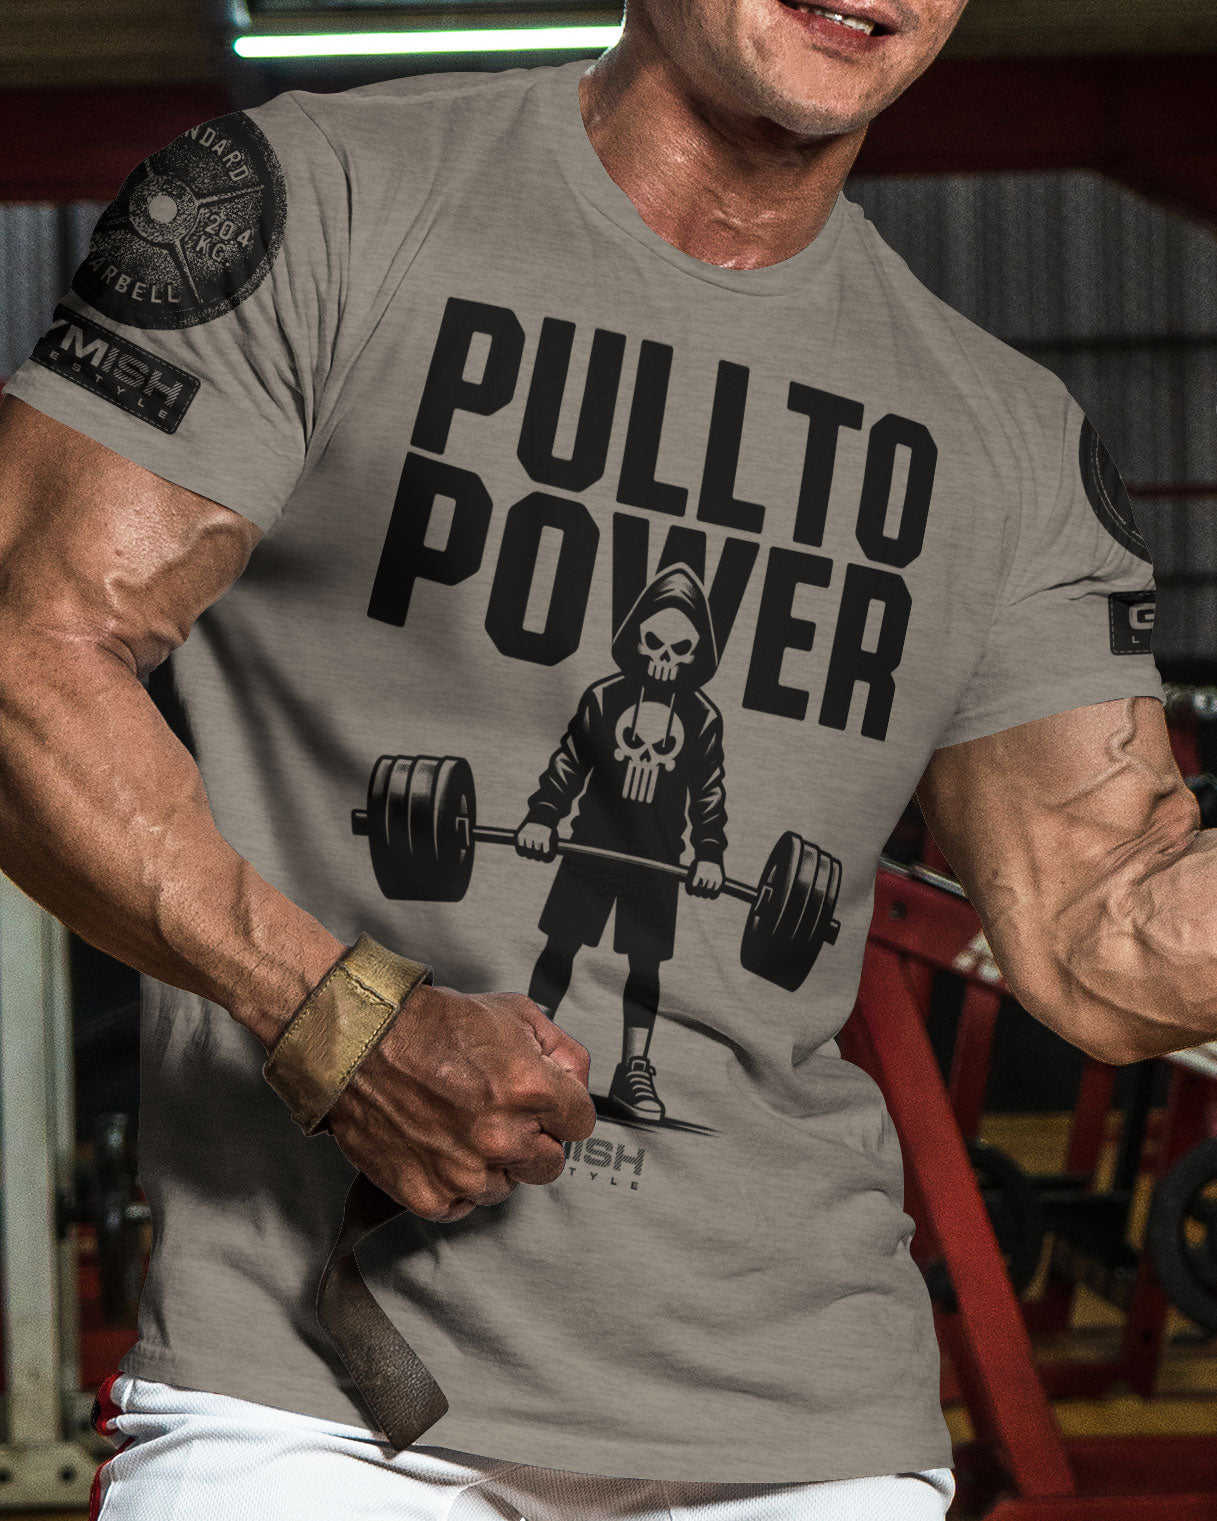 096-PULL TO POWER Workout Gym T-Shirt for Men